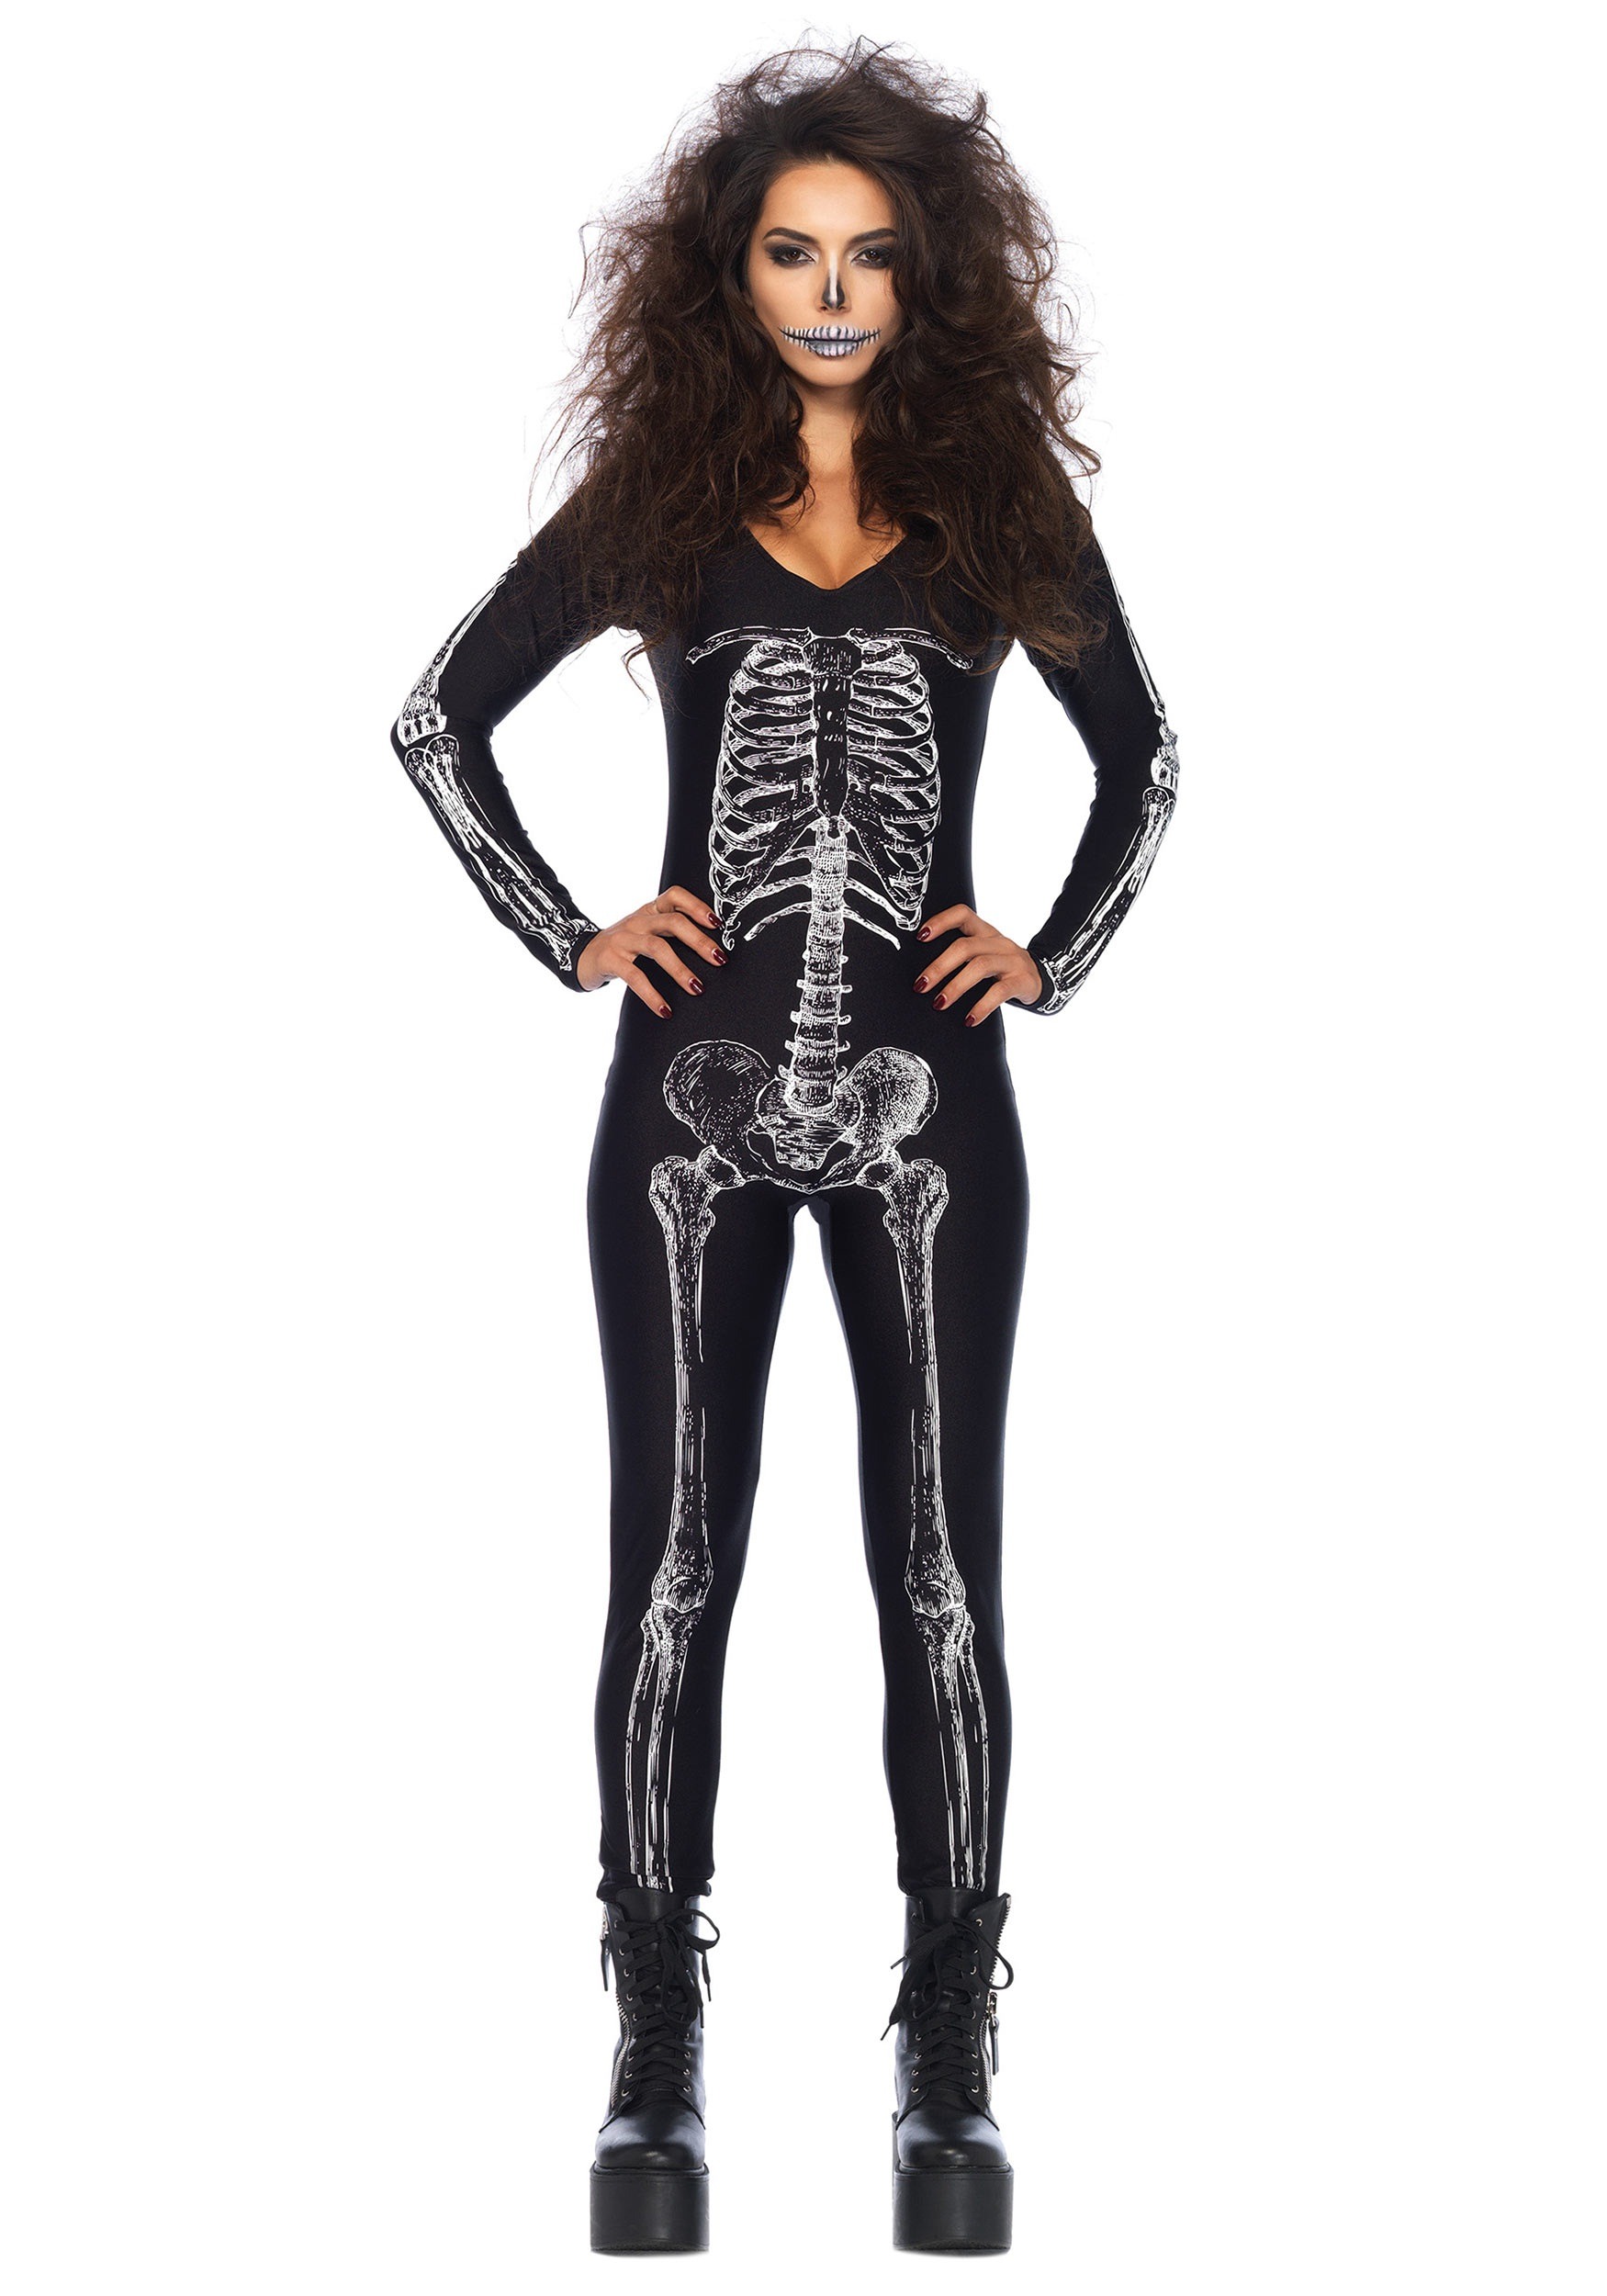 Image of X-Ray Skeleton Catsuit Women's Costume ID LE85602-L